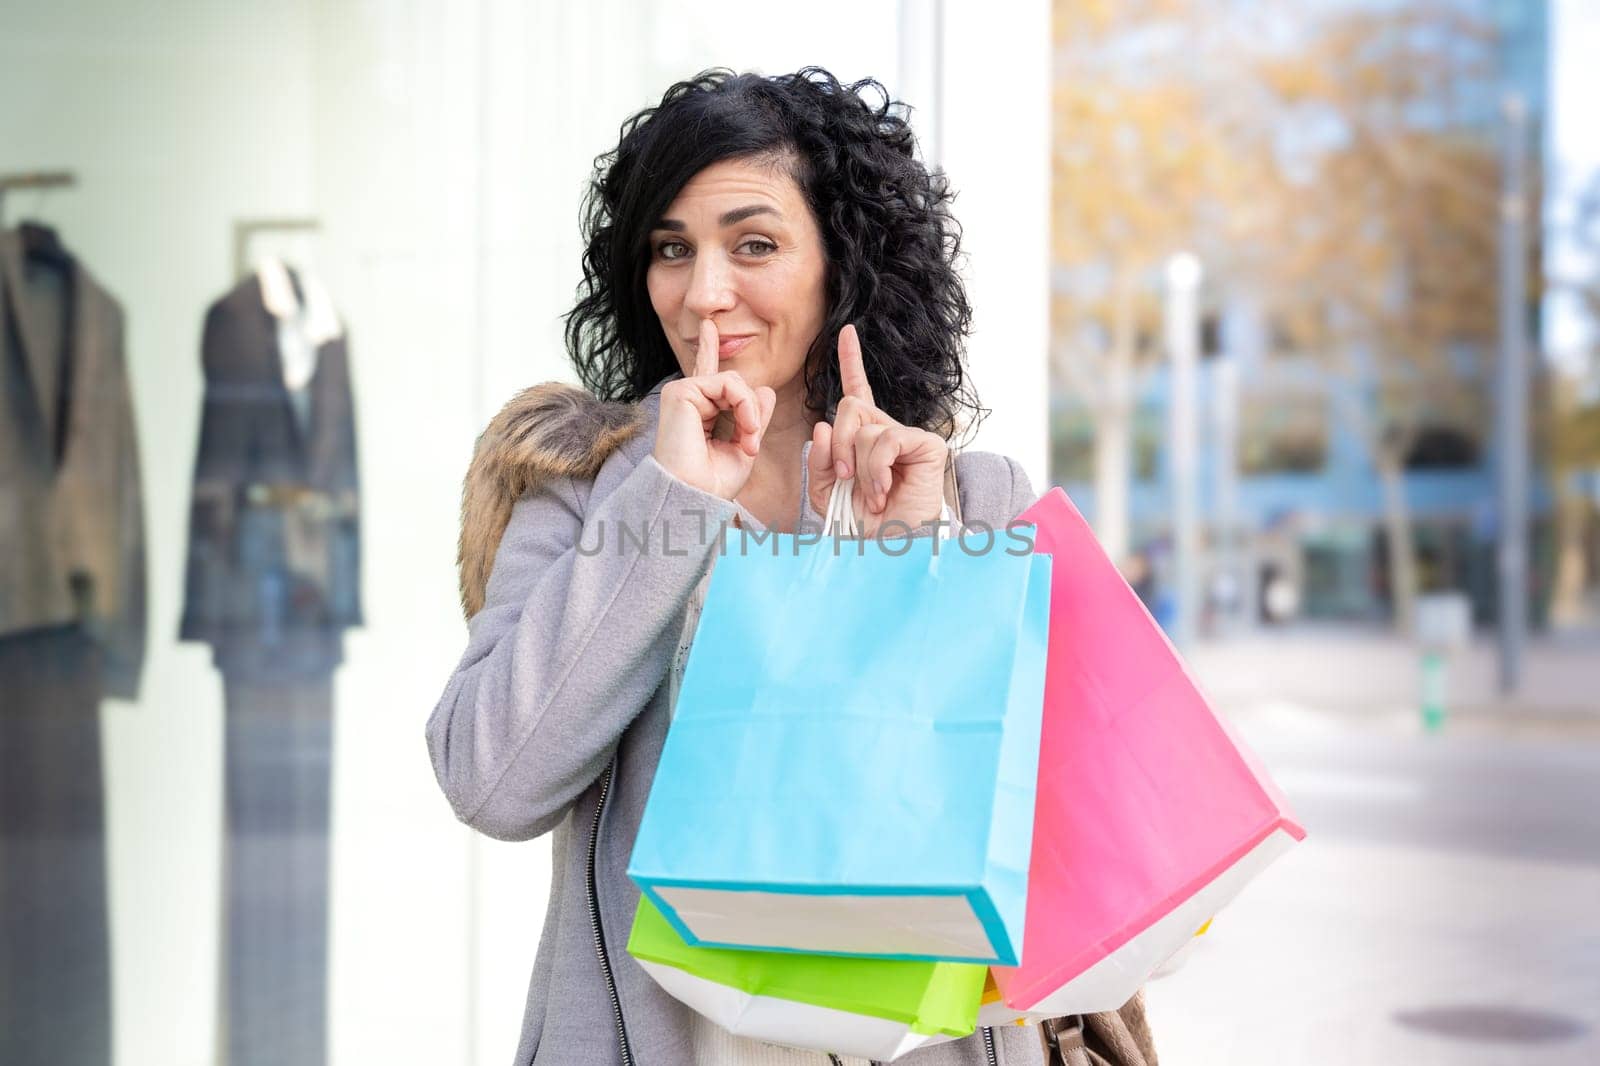 Woman shopping. Woman with shopping bags with defiant gesture. Consumerism, shopping, lifestyle concept